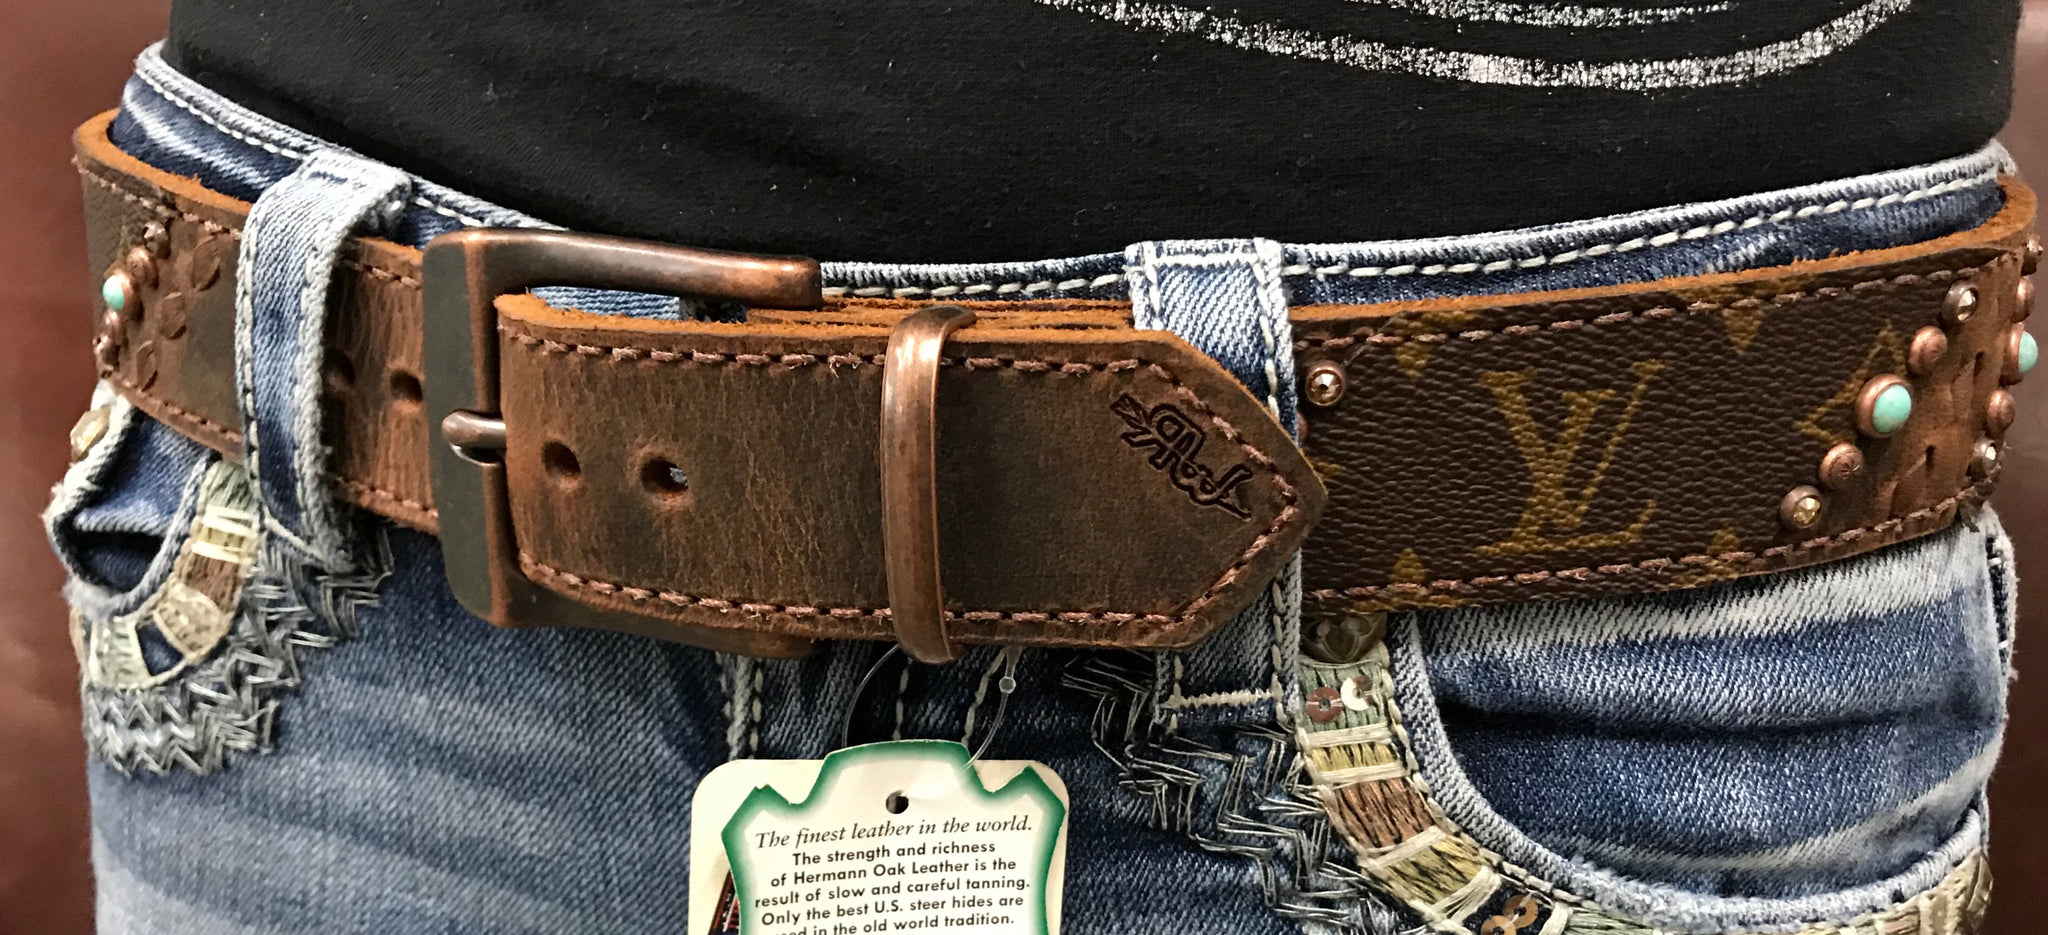 Lv New Wave 35mm Belt Other Leathers